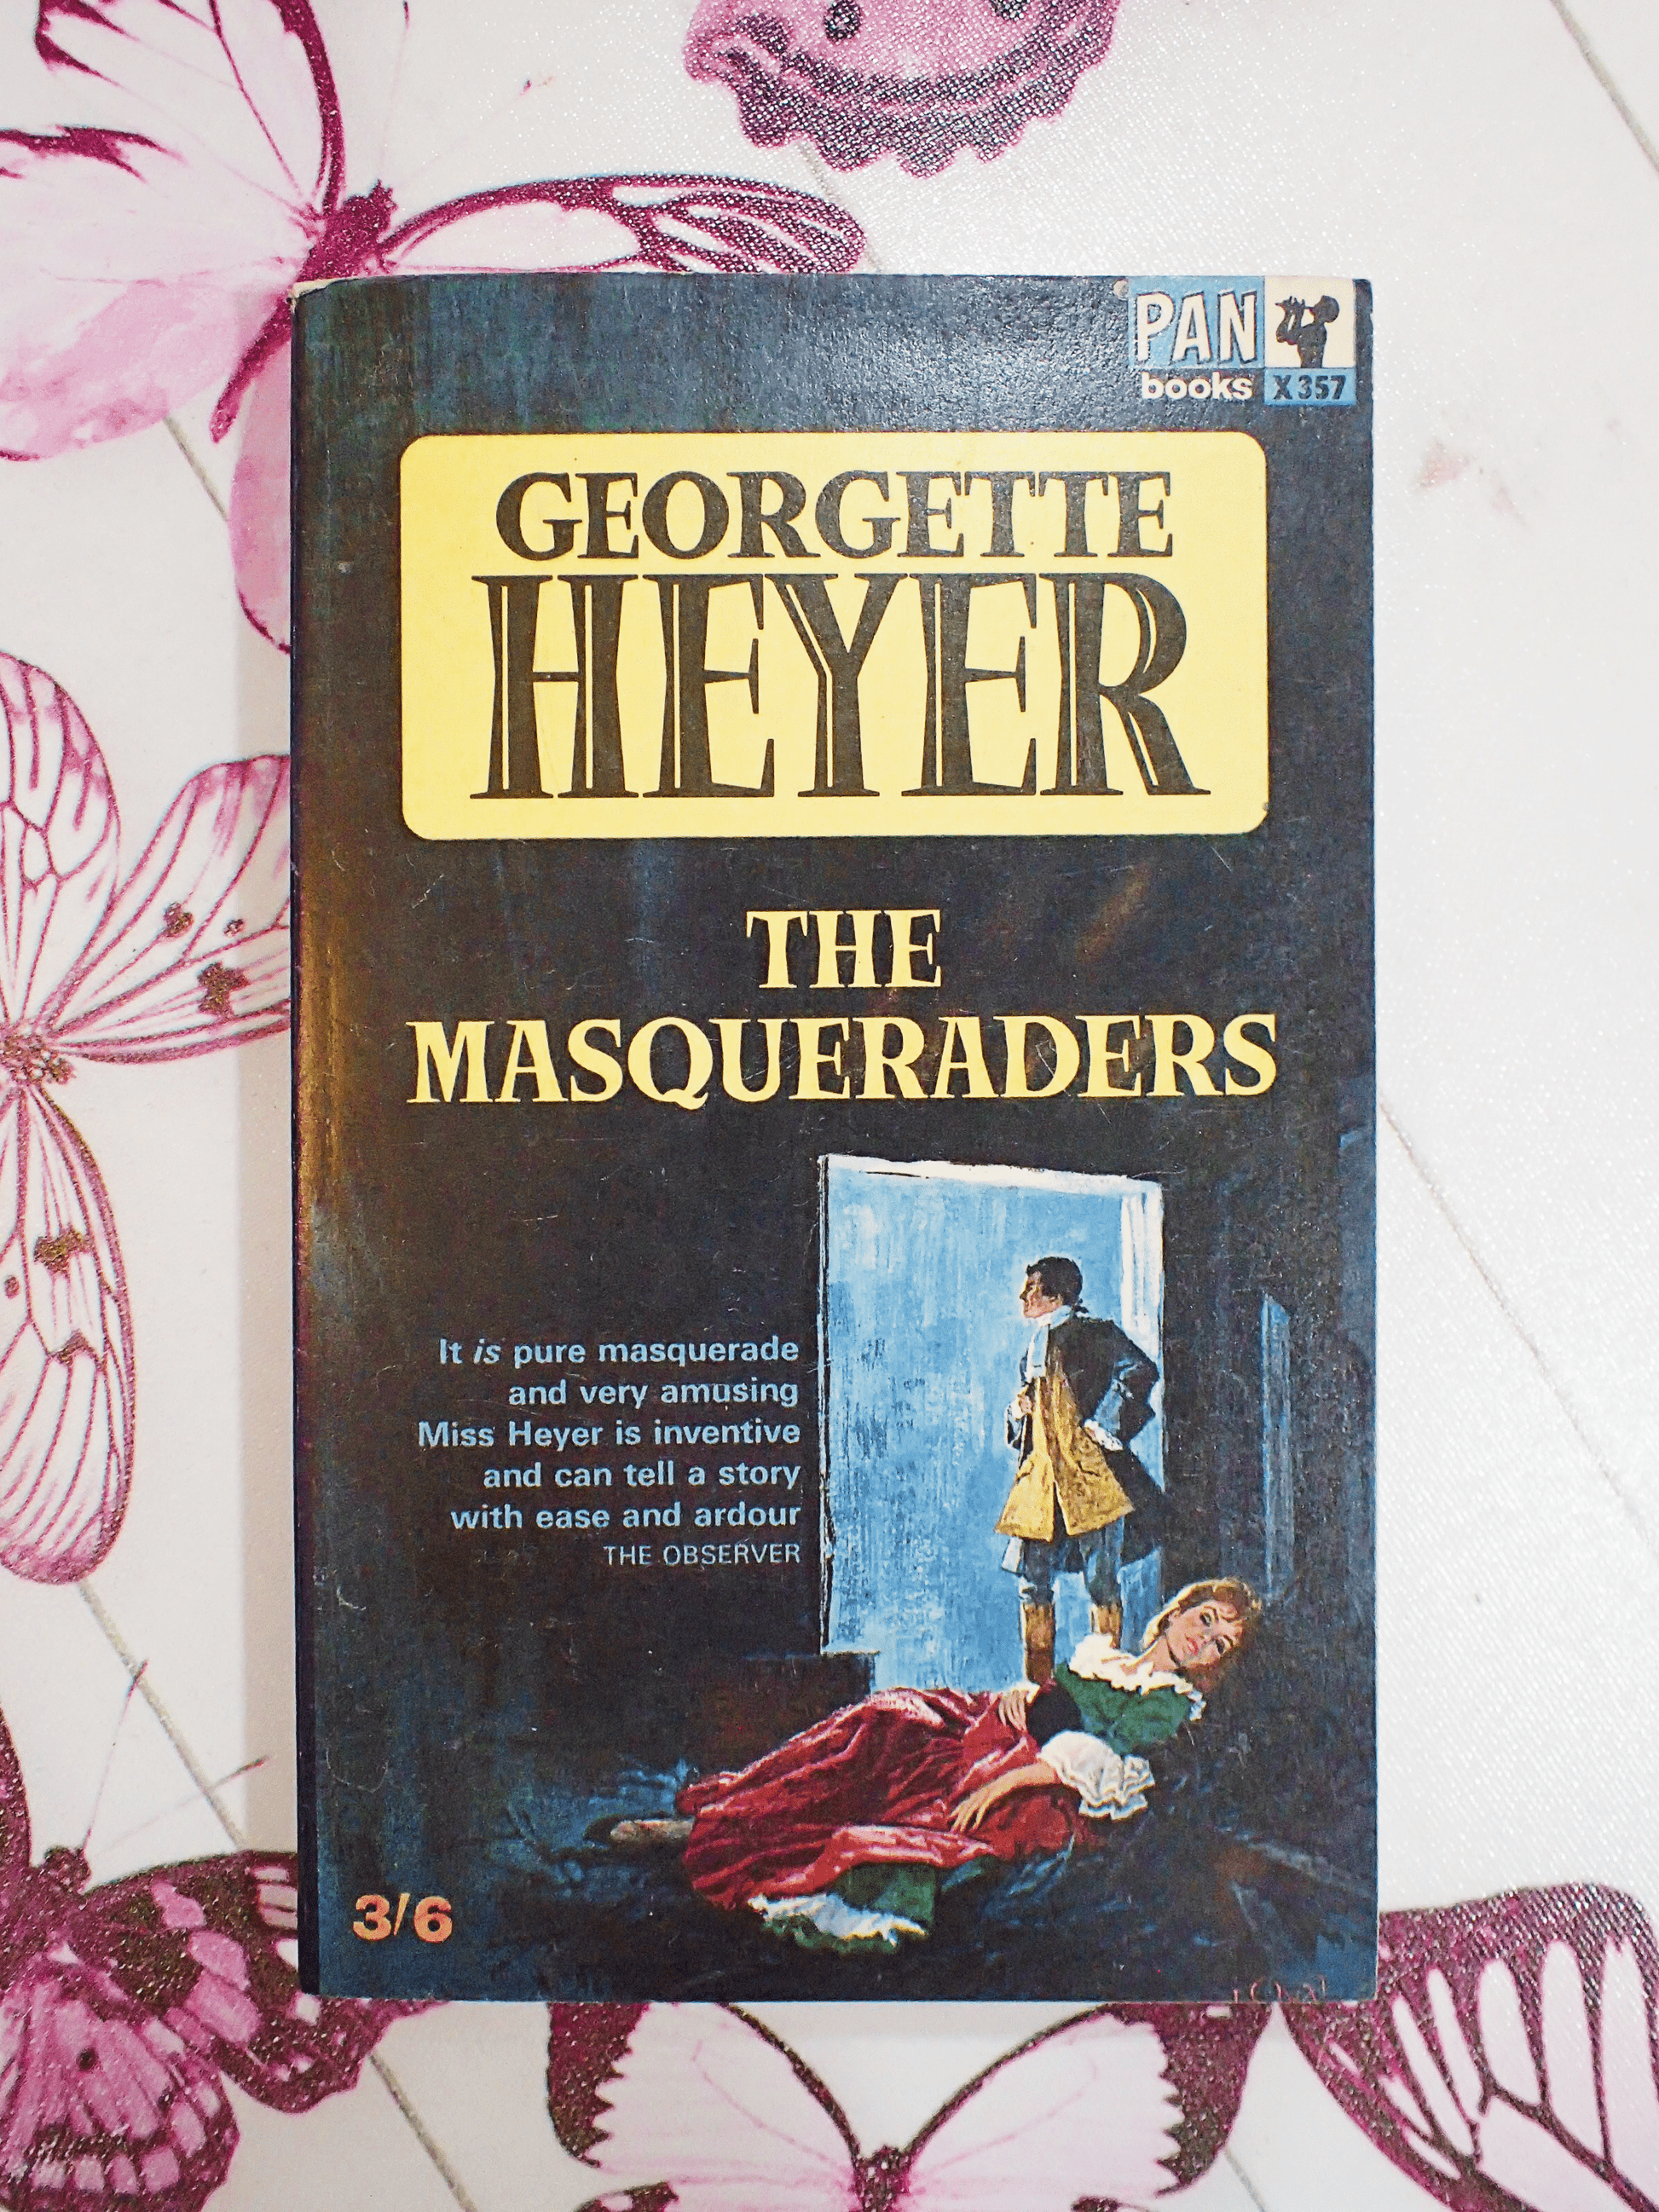 Front cover of vintage Pan paperback book, 'The Masqueraders', by Georgette Heyer showing a man and woman in Georgian costume and the book titles in yellow and black. 